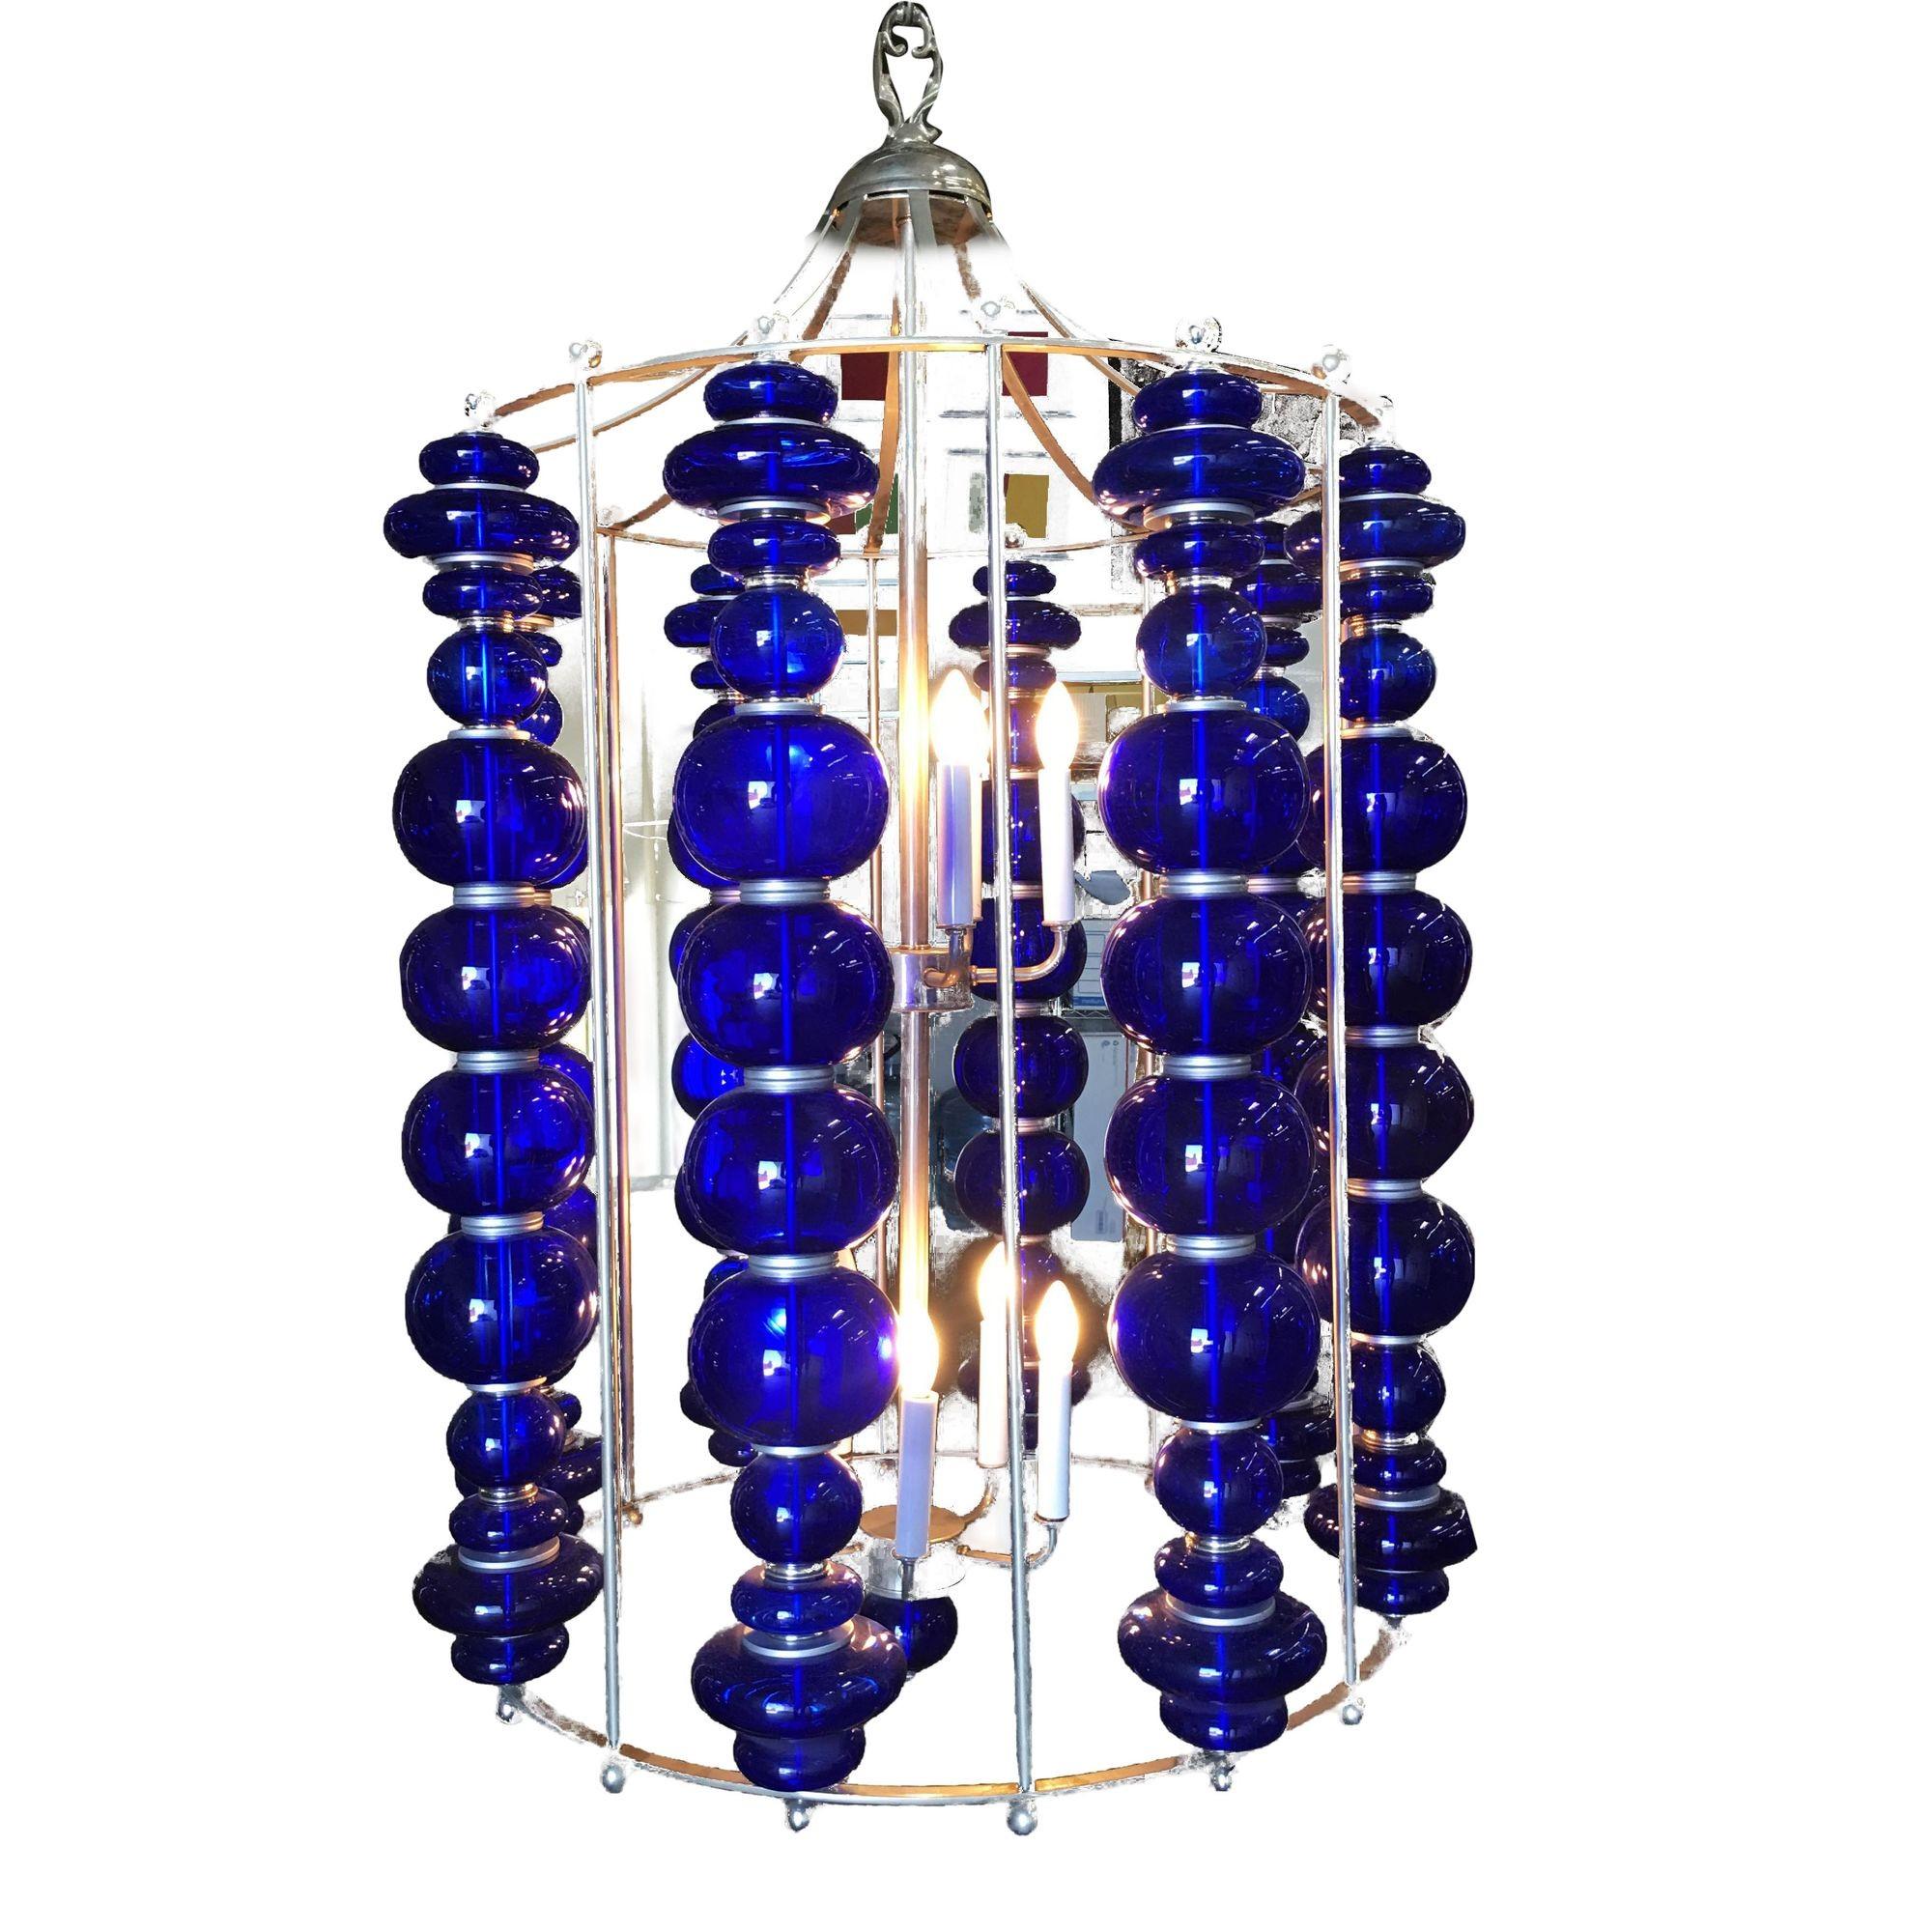 Mid-Century Modern Modern Stacked Cobalt Glass Chandelier with Nickel Finish For Sale